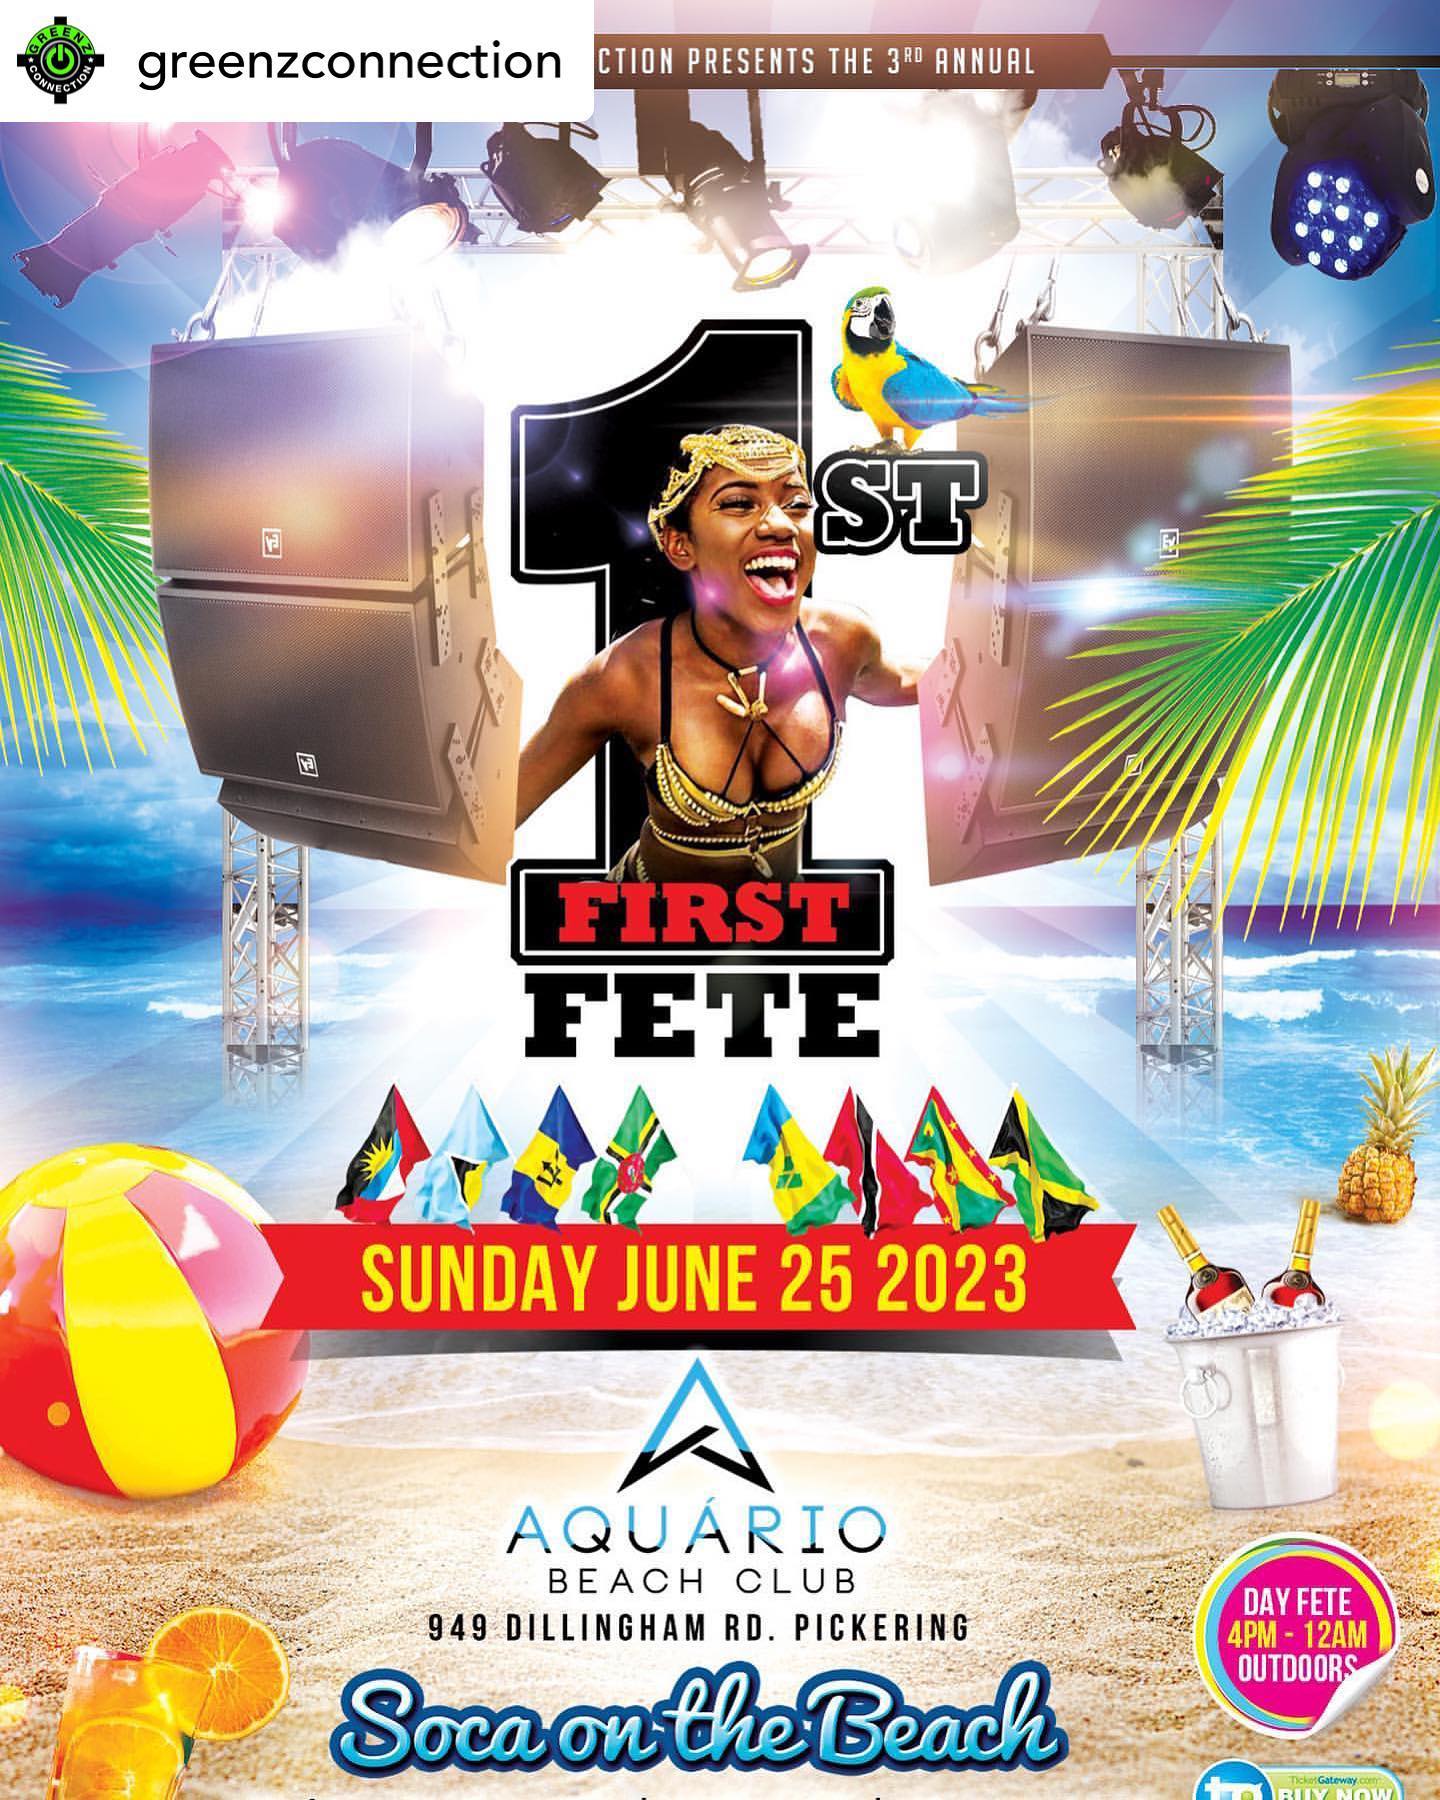 FIRST 1st FETE.
 🥇🥇🥇🥇🥇

️ SOCA ON THE BEACH

️THE FIRST FETE FOR
  THE SUMMER

◇-—————————

️ SUNDAY JUNE 25 2023 

️ @THE AQUARIO
  BEACH CLUB
  949 DILLINGHAM RD.
 (Pickering)

️ TIME: 4PM - 12AM
  OUTDOORS

◇-—————————

️ ADM: LIMITED $30
  EARLY BIRD TICKETS
https://www.ticketgateway.com/event/view/1st-fete-2023

️CABANA BOOTHS

️ INFO: 647.326.4969
  416.705.2453 

️ POWERED BY:
 GREENZ CONNECTION

◇-—————————

@djgreenzski
@devinciez_caribvybz
@demolition_sounds
@thehive_socasweetness
@djscrewinternational
@purplecityhd
@blackblingzfamily
@thatmindlesschicaa
@masavenger
@islandboyentertainment_
@loudenttoronto
@jab_united 
@sixside_clothing
@sadieslabelle 
@greenzconnection
@scramble_thedj @selecta_lefty
@dj_karem21